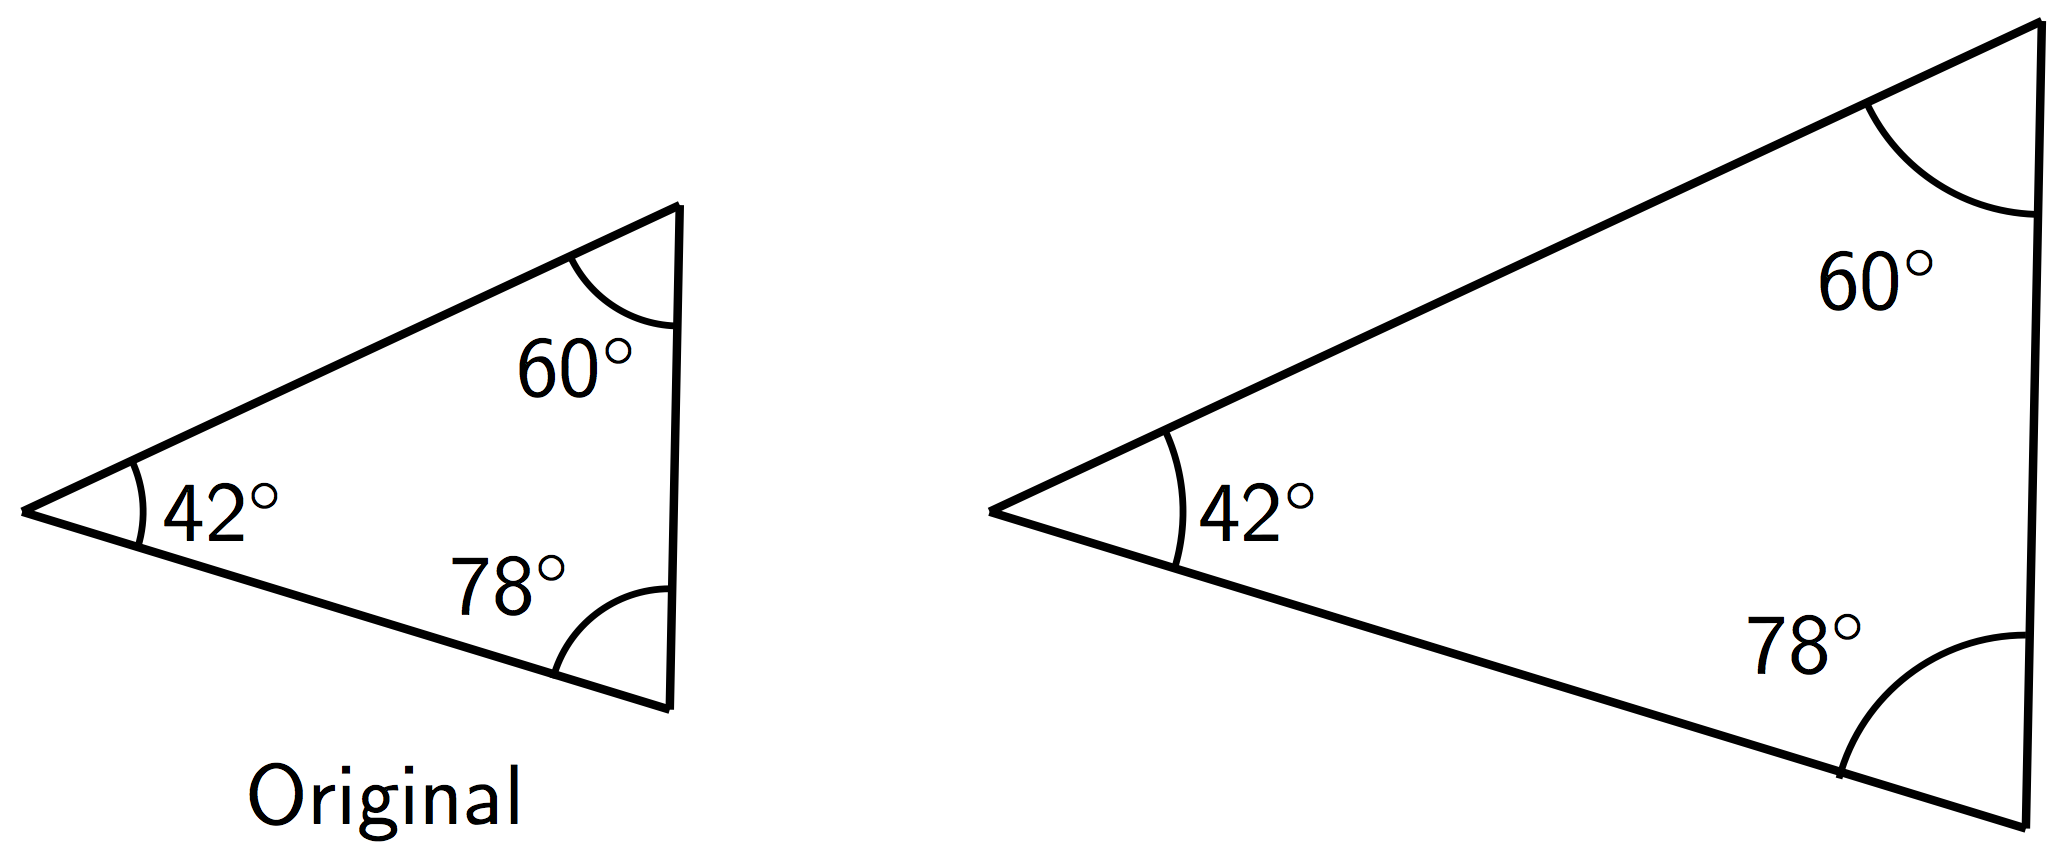 Original triangle has angle measures 42, 60, and 78 degrees. The larger, scaled version of the triangle has angle measures 42, 60, and 78 degrees.